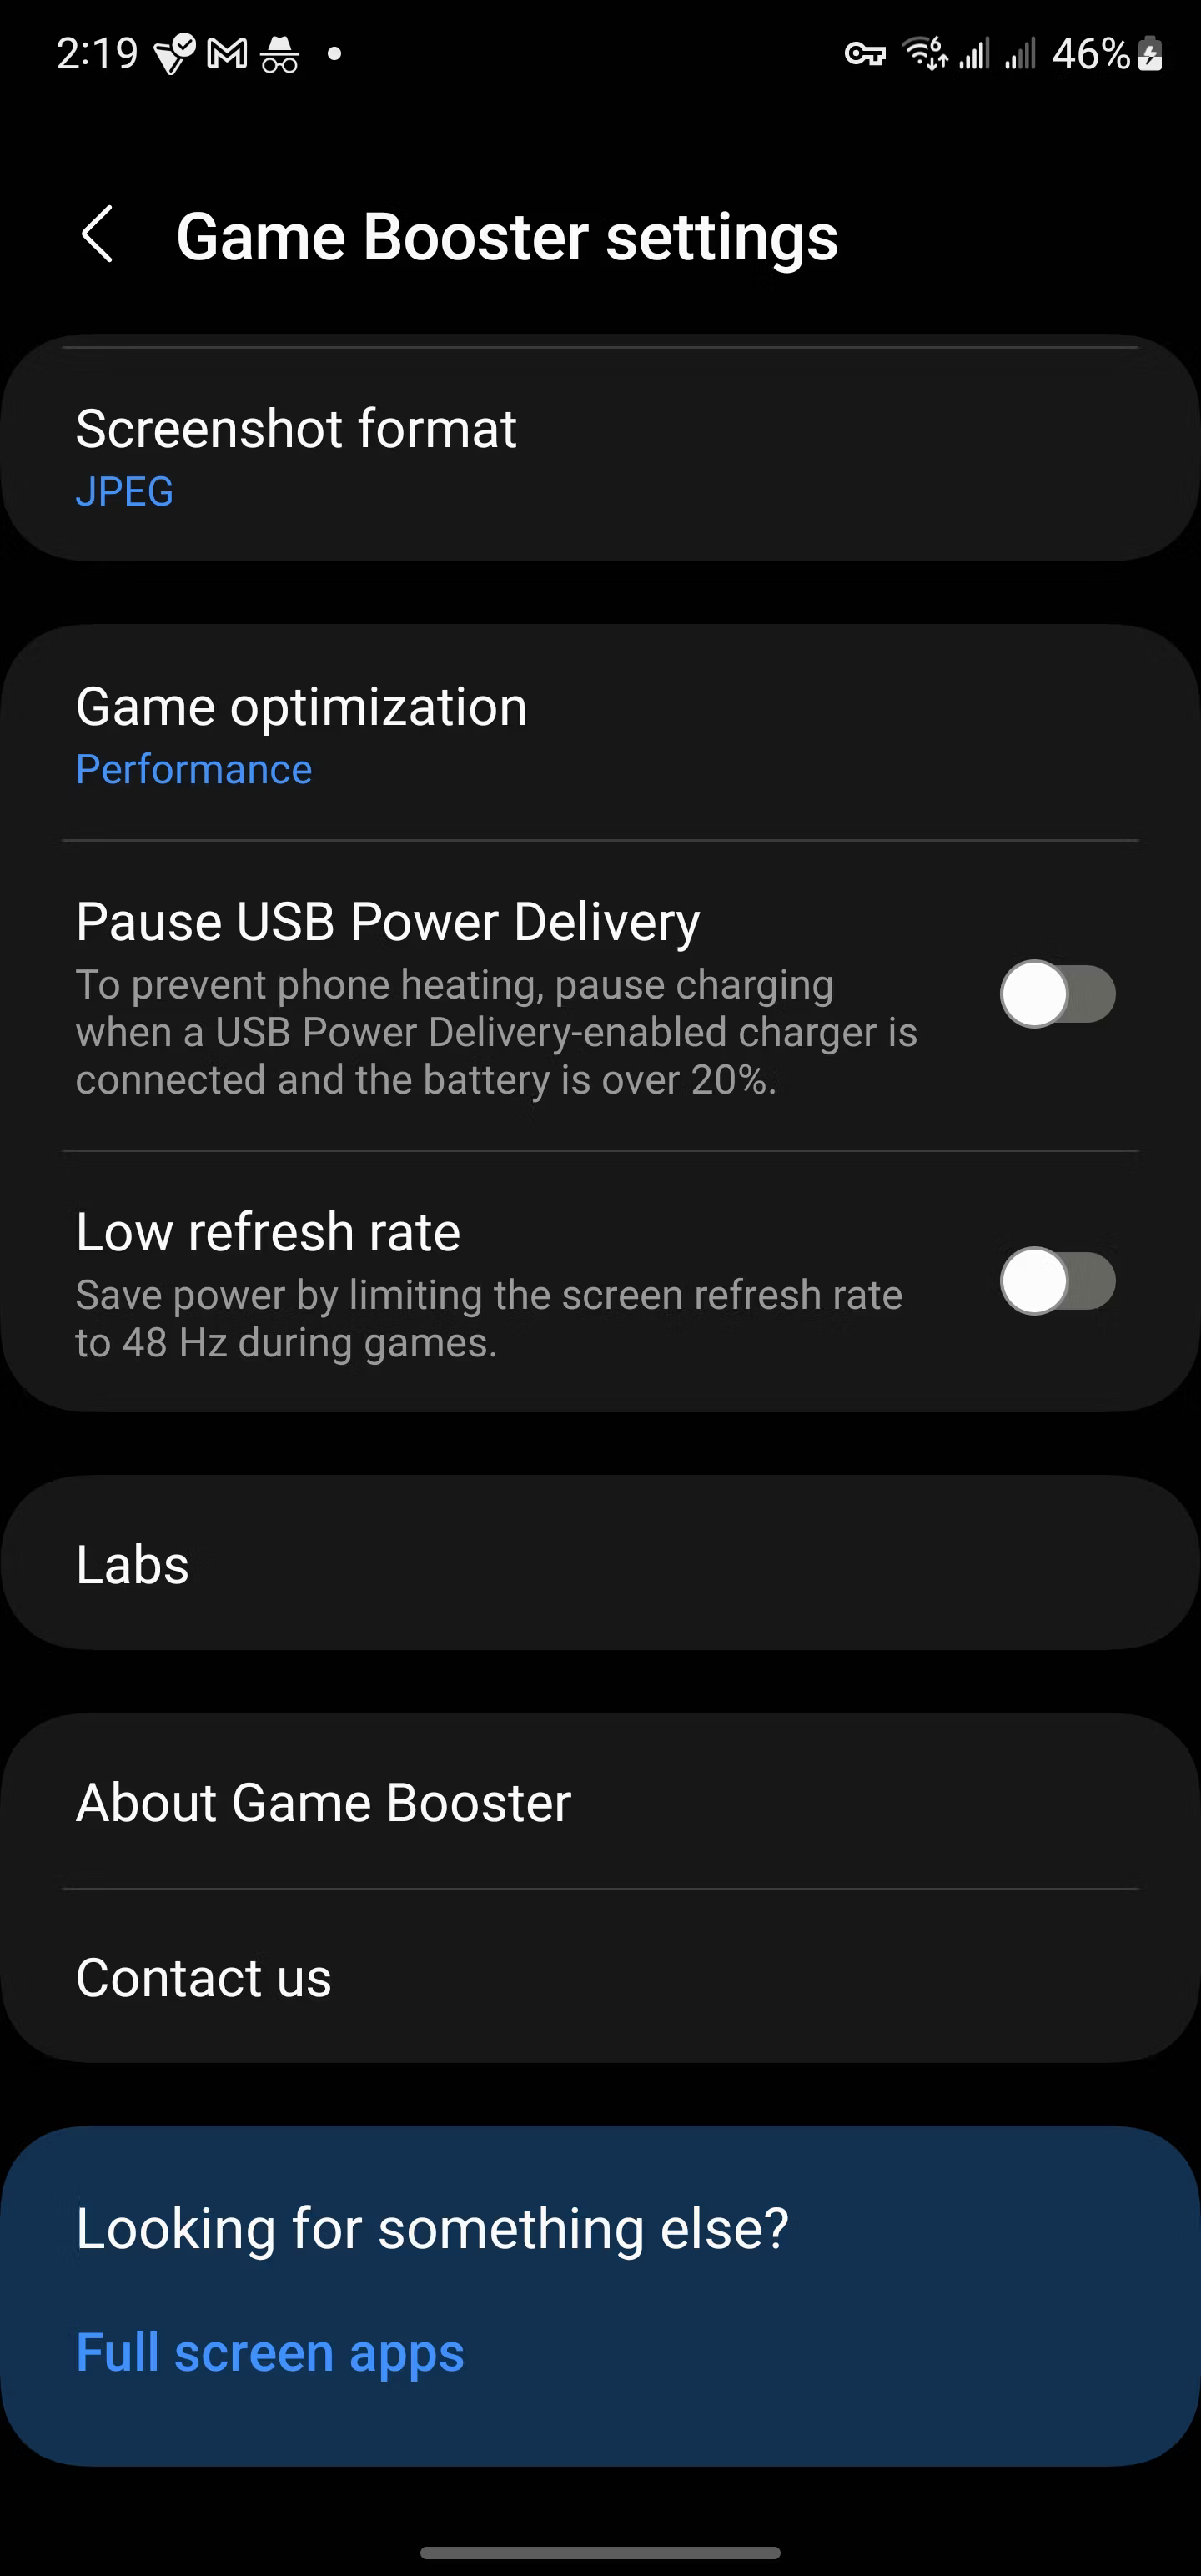 Pause USB Power Delivery is a godsend for mobile gamers - Galaxy S23's best new software feature coming to many older Galaxy phones, gamers rejoice